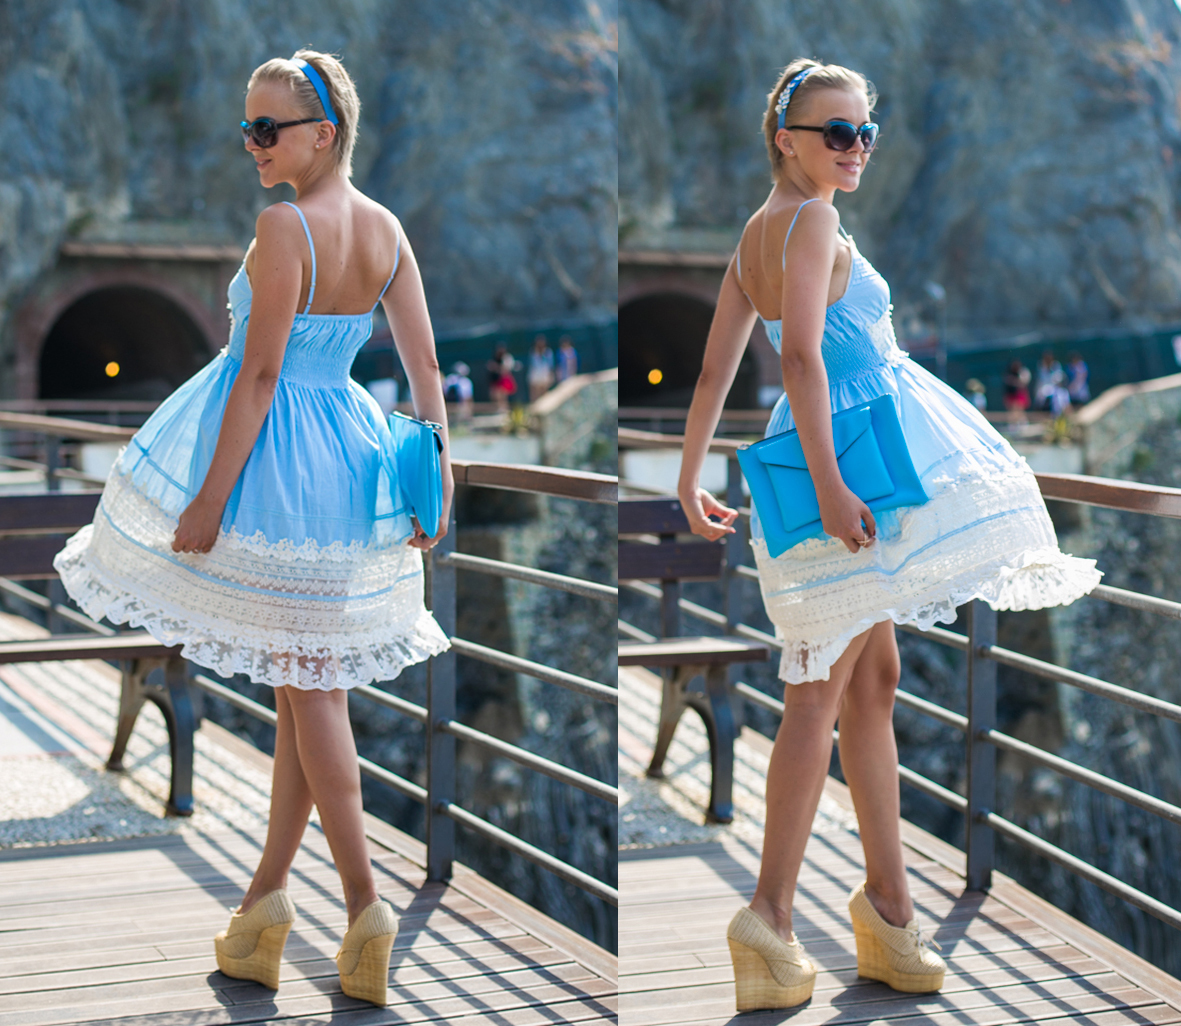 1-thecablook darya kamalova fashion blog street style monterosso al mare cinqueterre blue baby lace dress chicwish asos headband clutch burberry prosum summer booties straw wedges breakfast-35